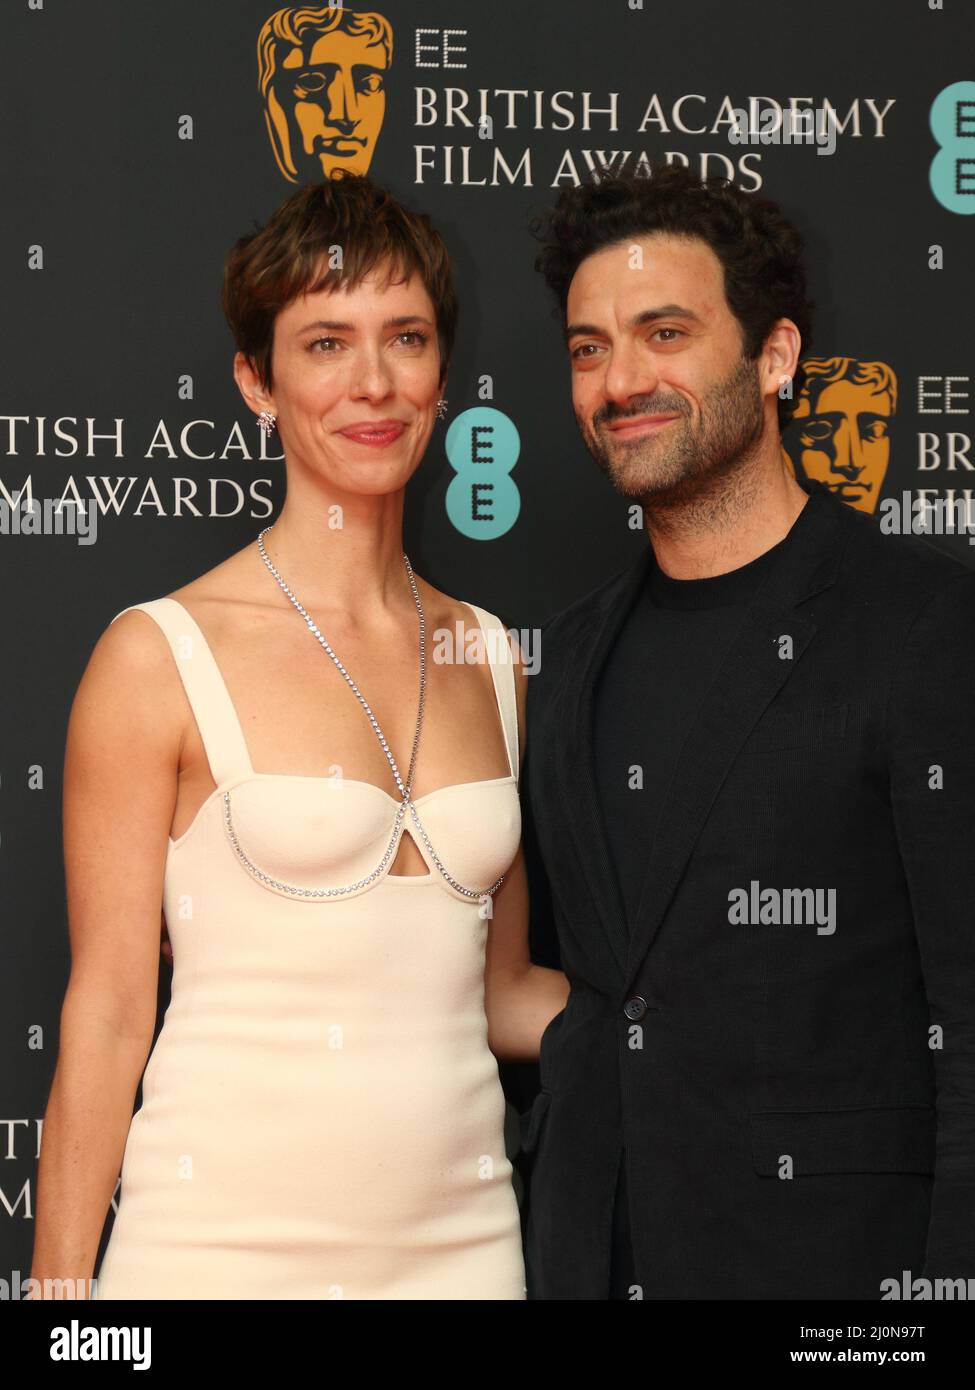 London, UK, 12th Mar 2022, English actress Rebecca Hall and American actor Morgan Spector attend the British Academy Film Awards Nominees' Reception. Stock Photo